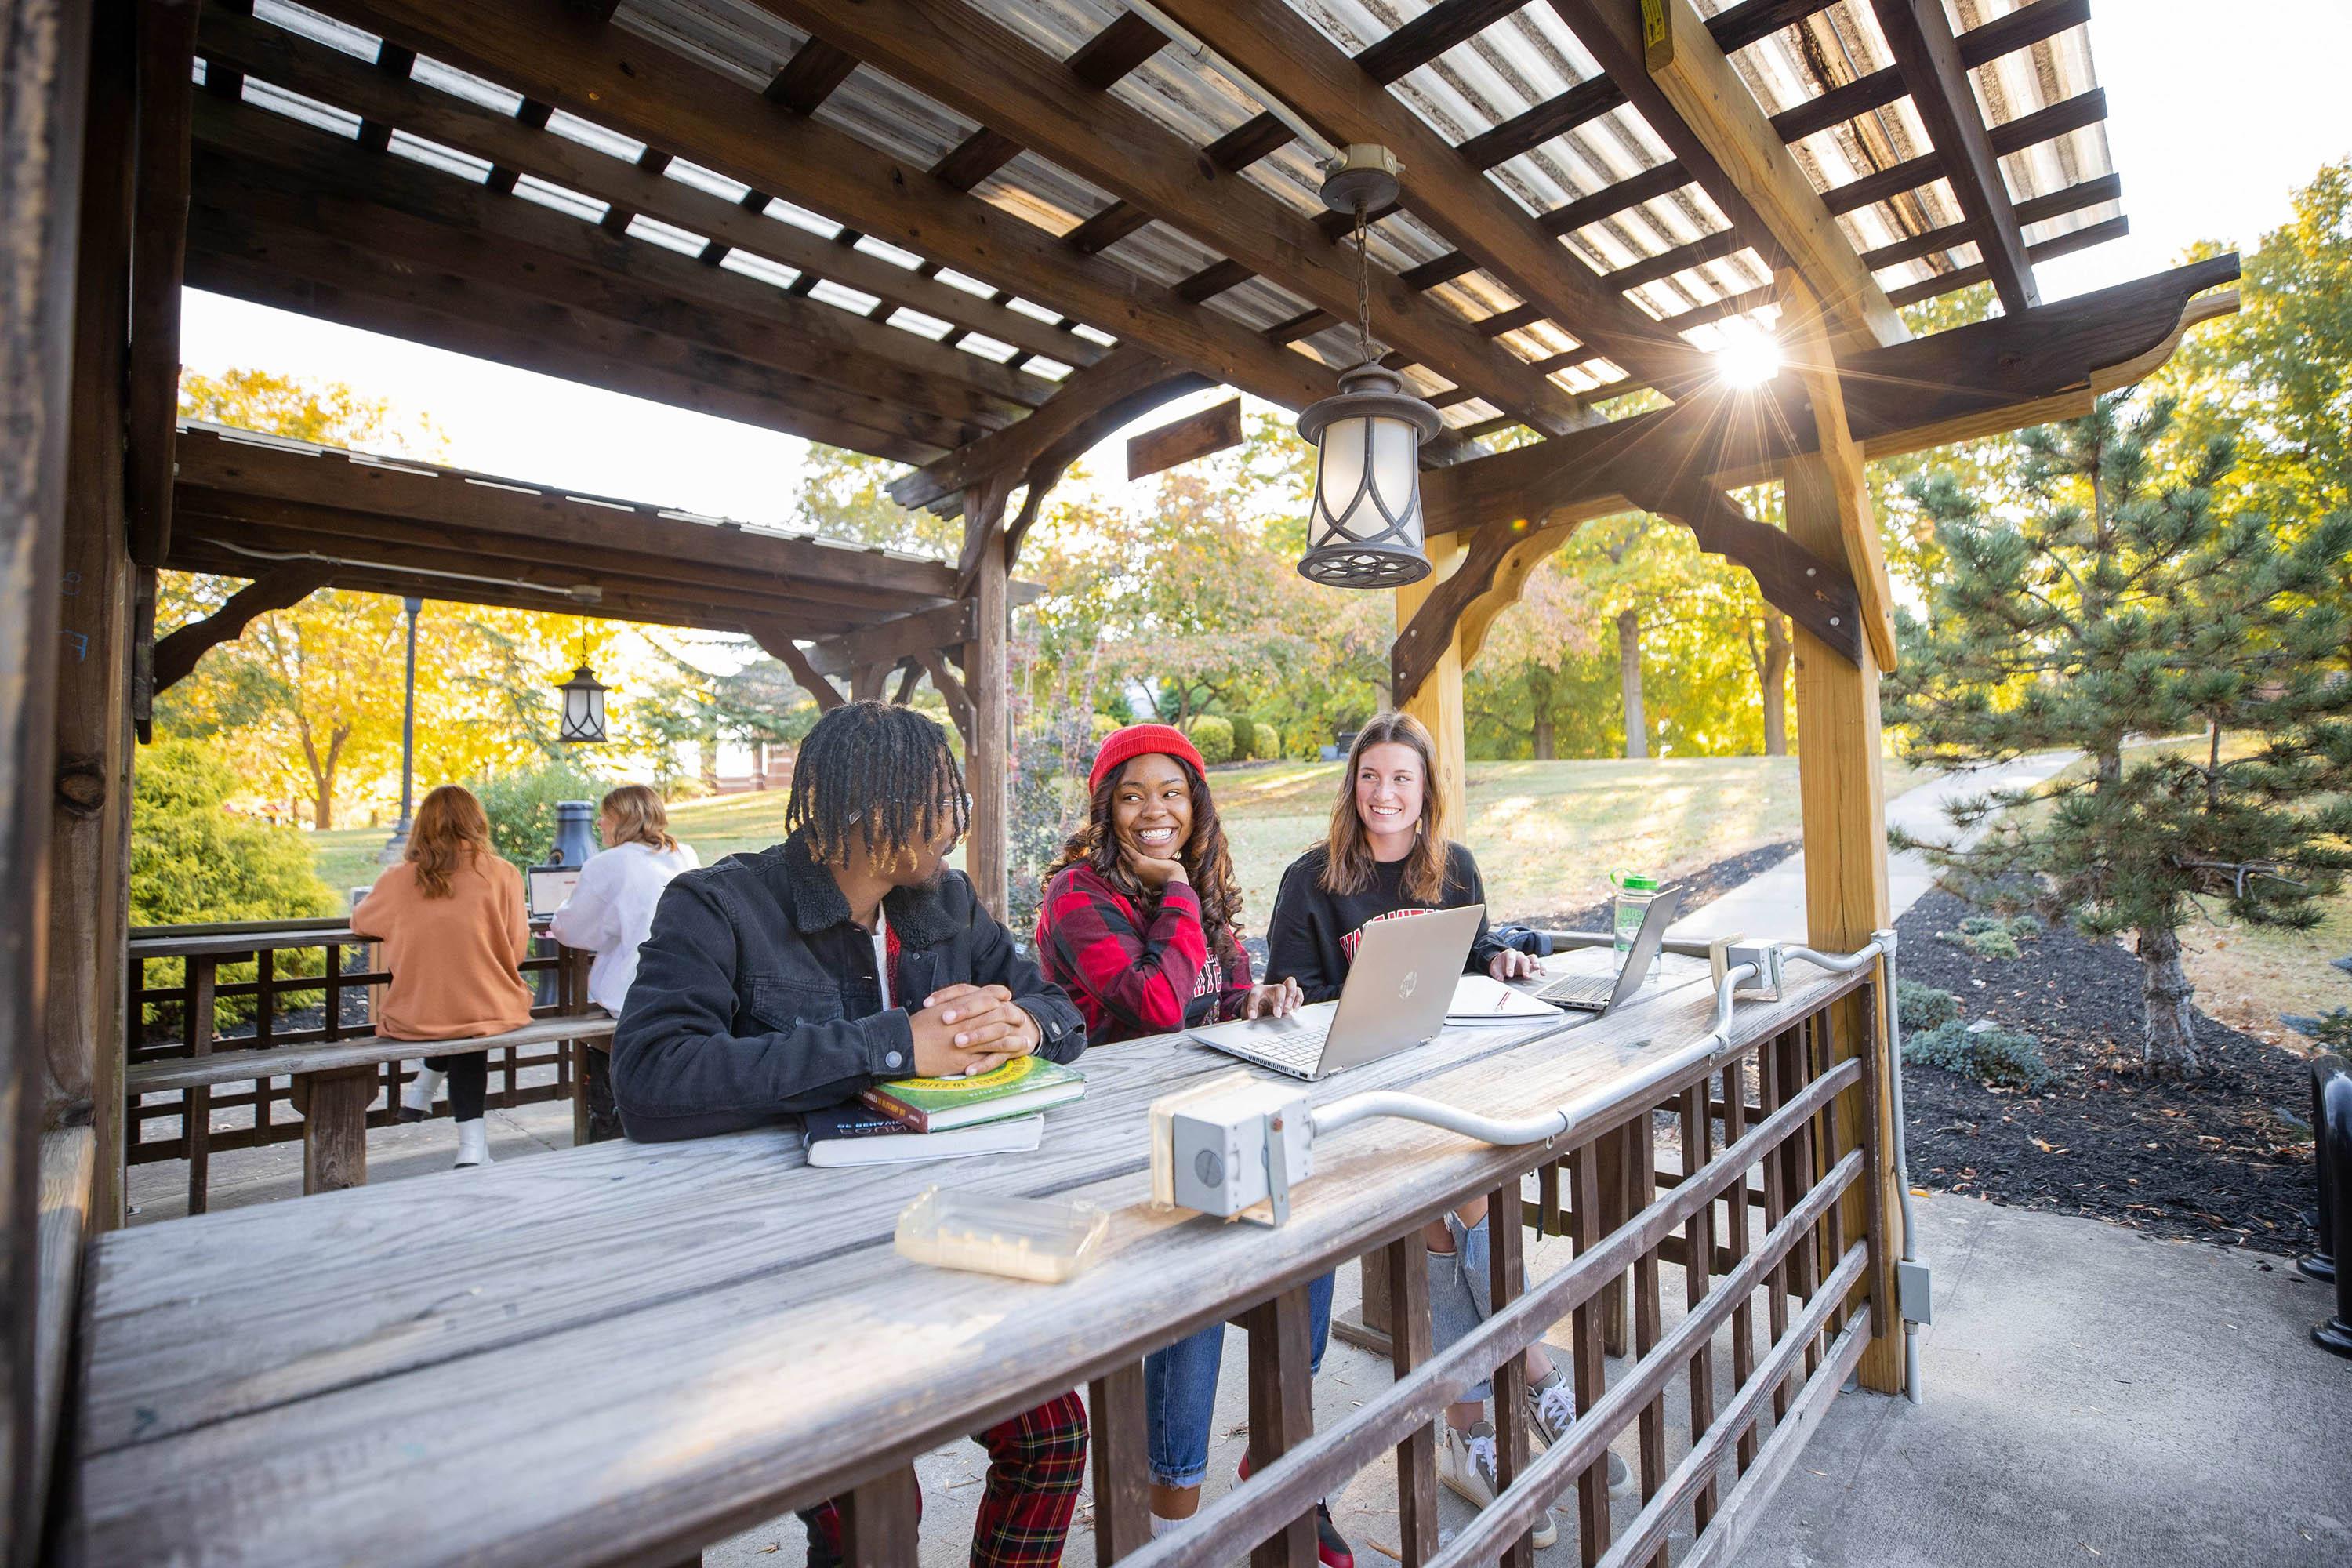 Students sit in the pergola next to the library